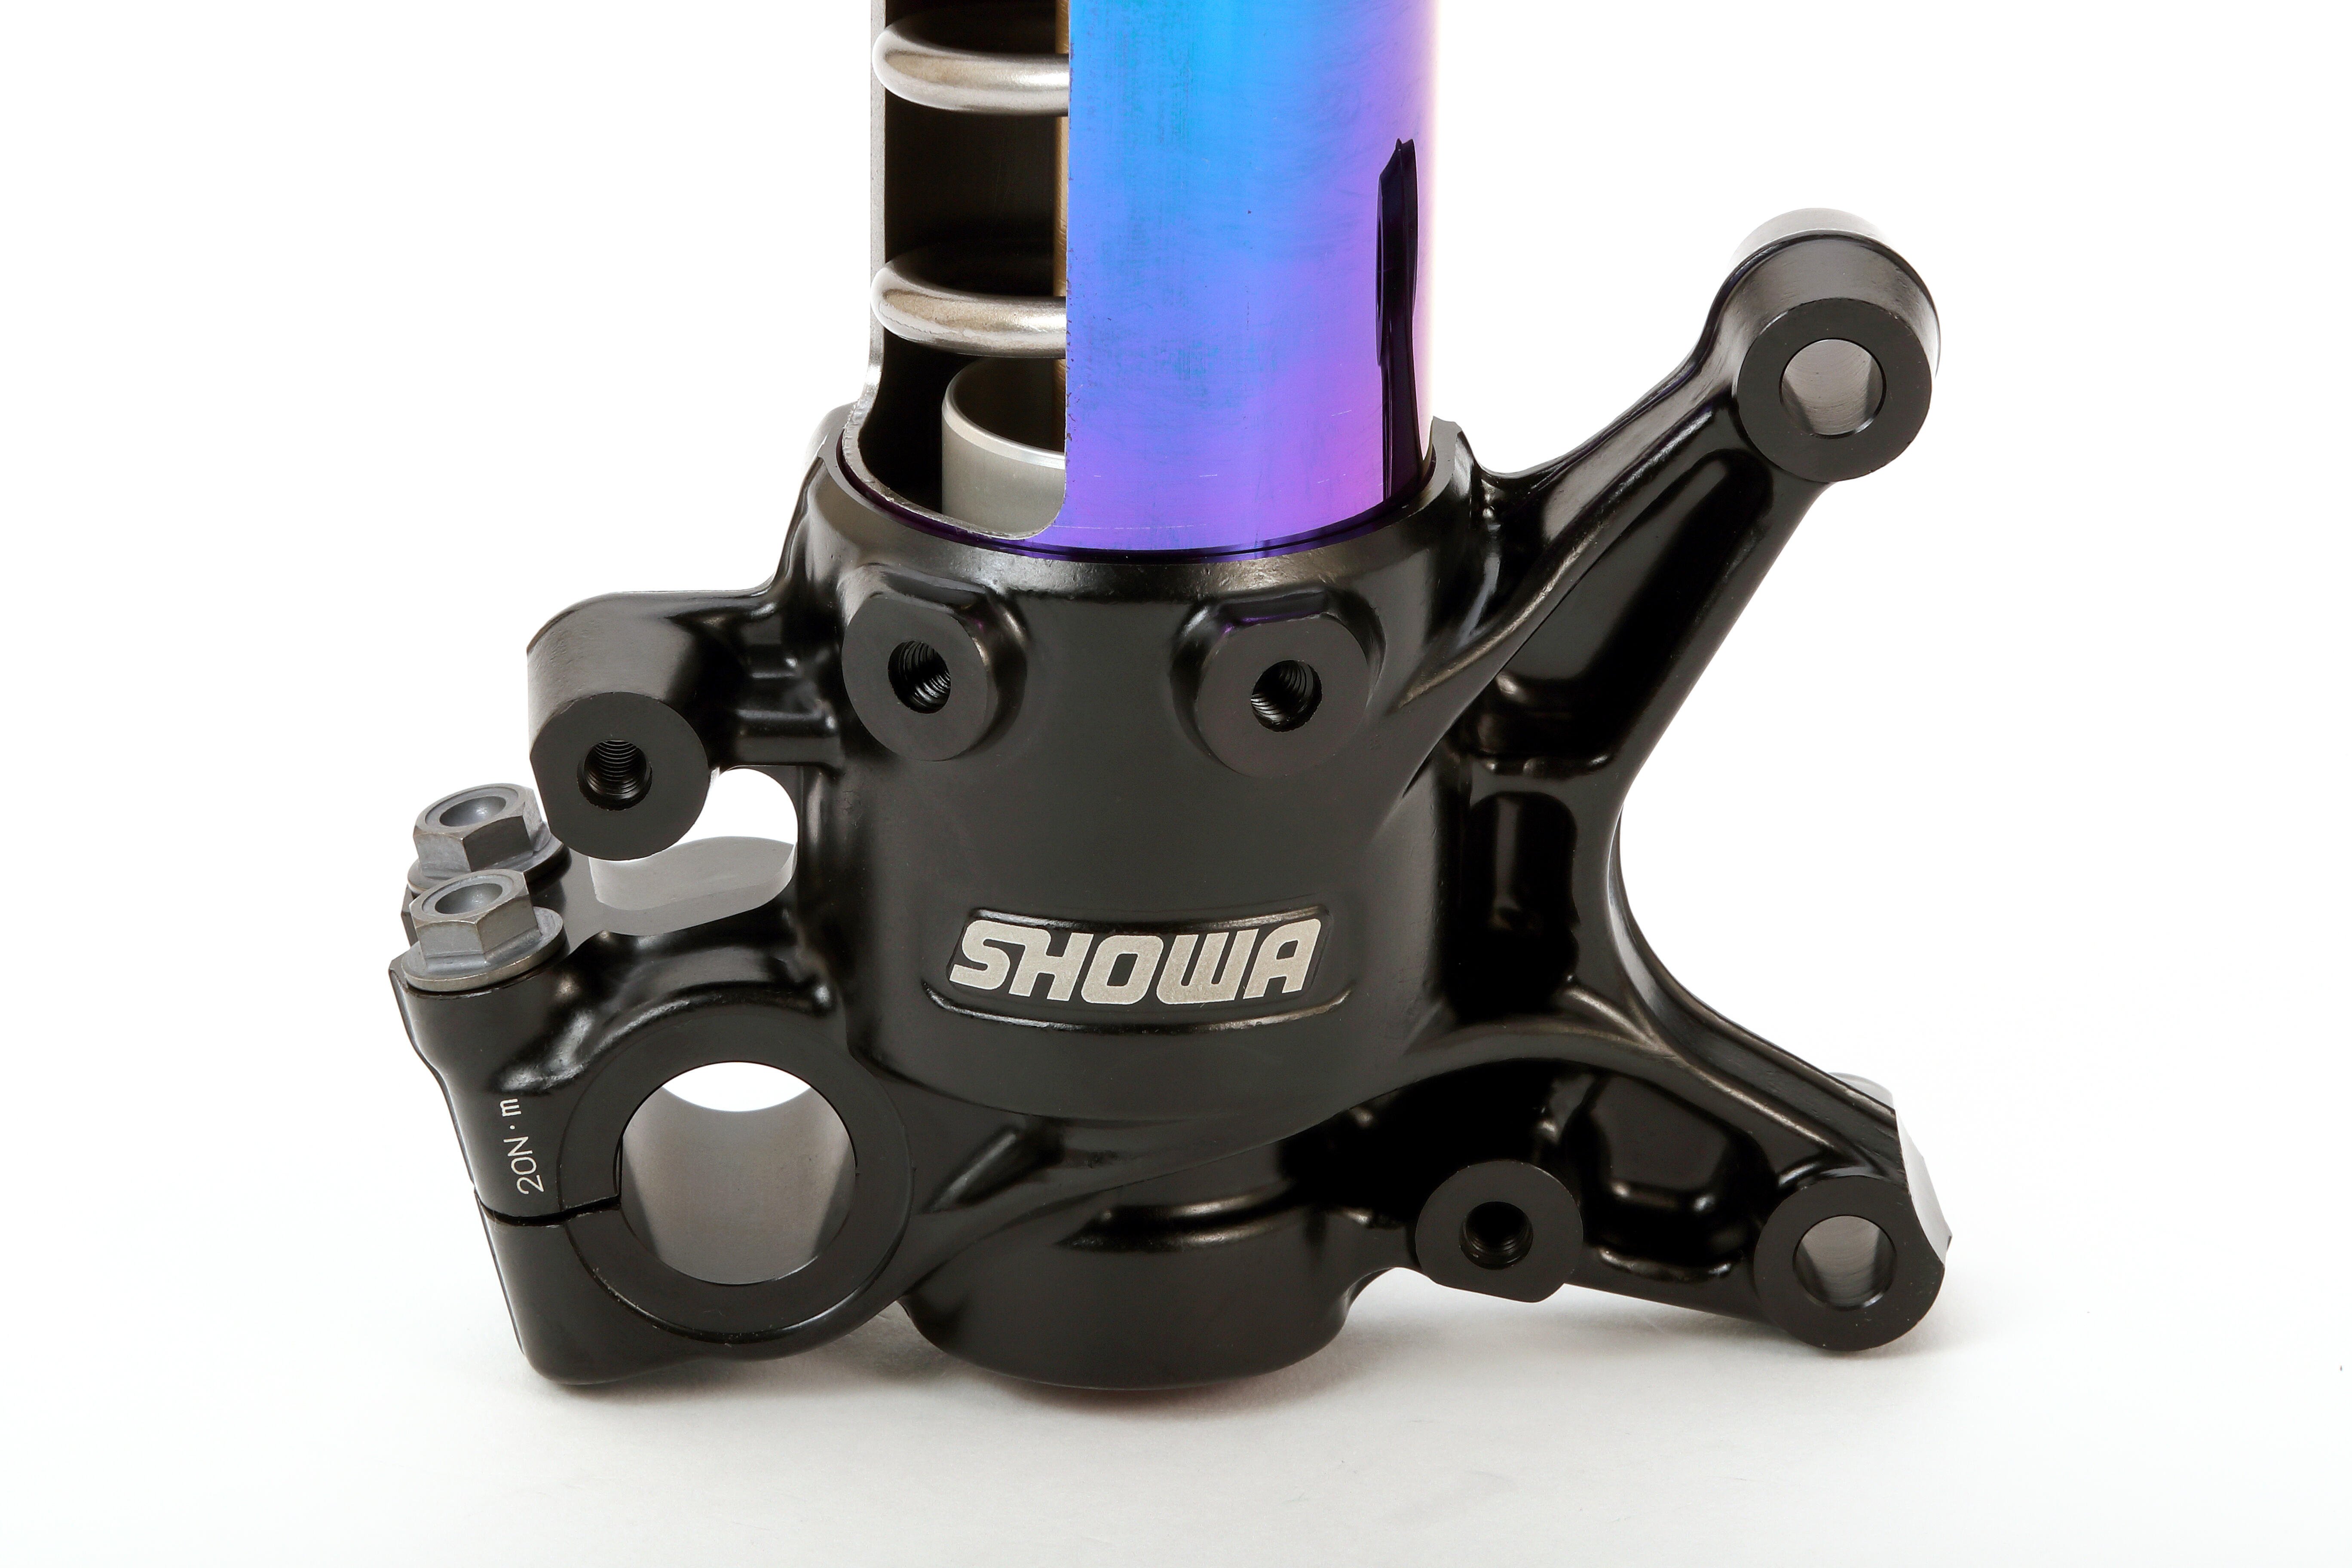 SHOWA racing front fork